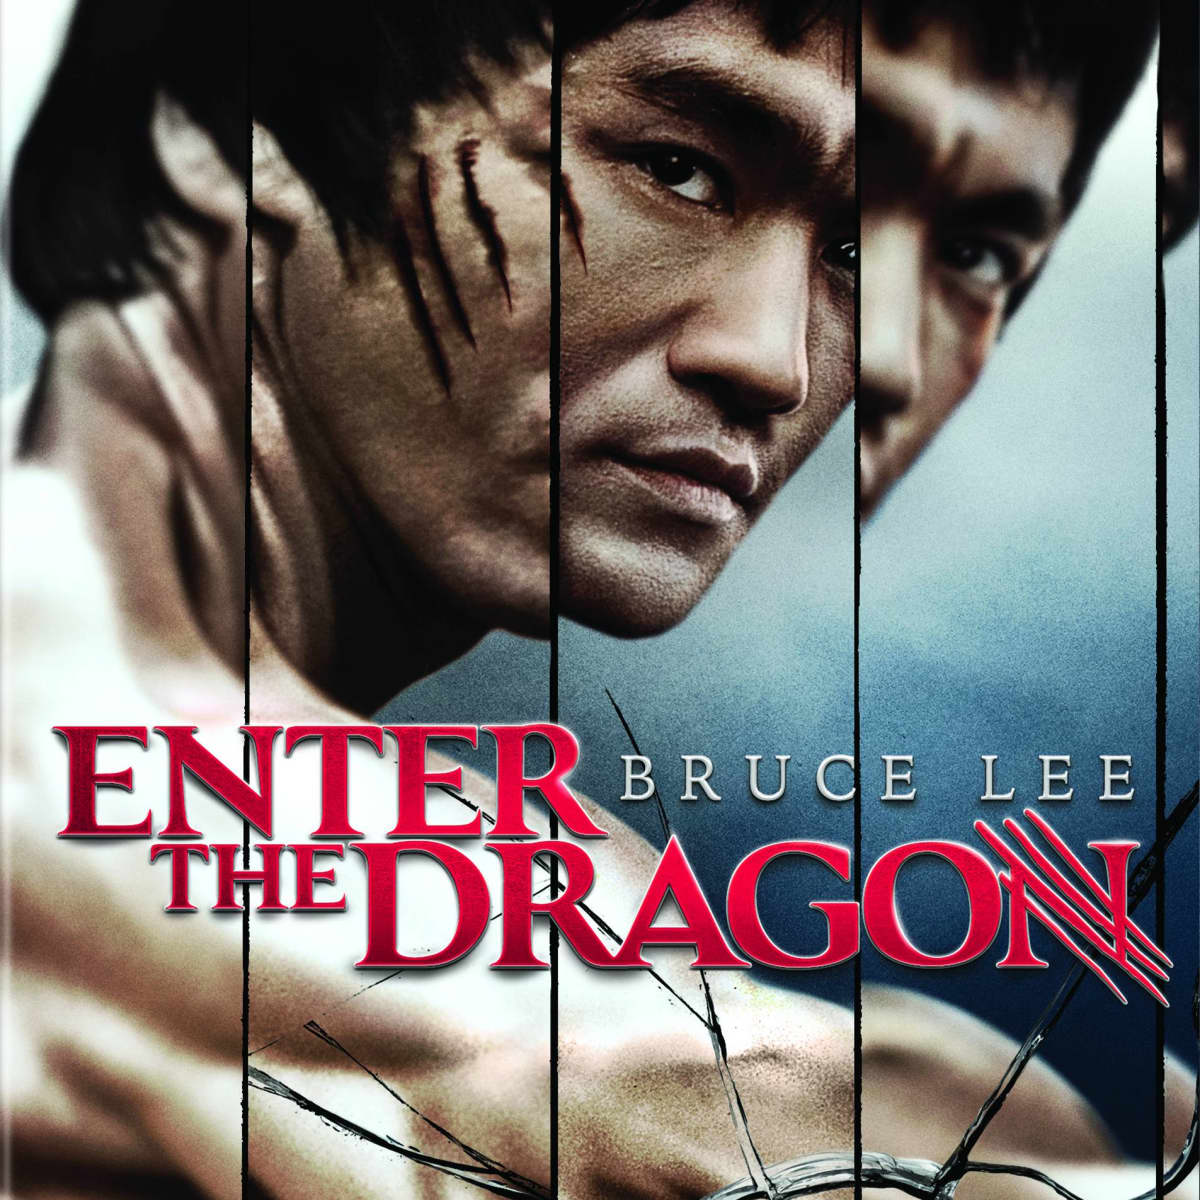 watch enter the dragon full movie online free